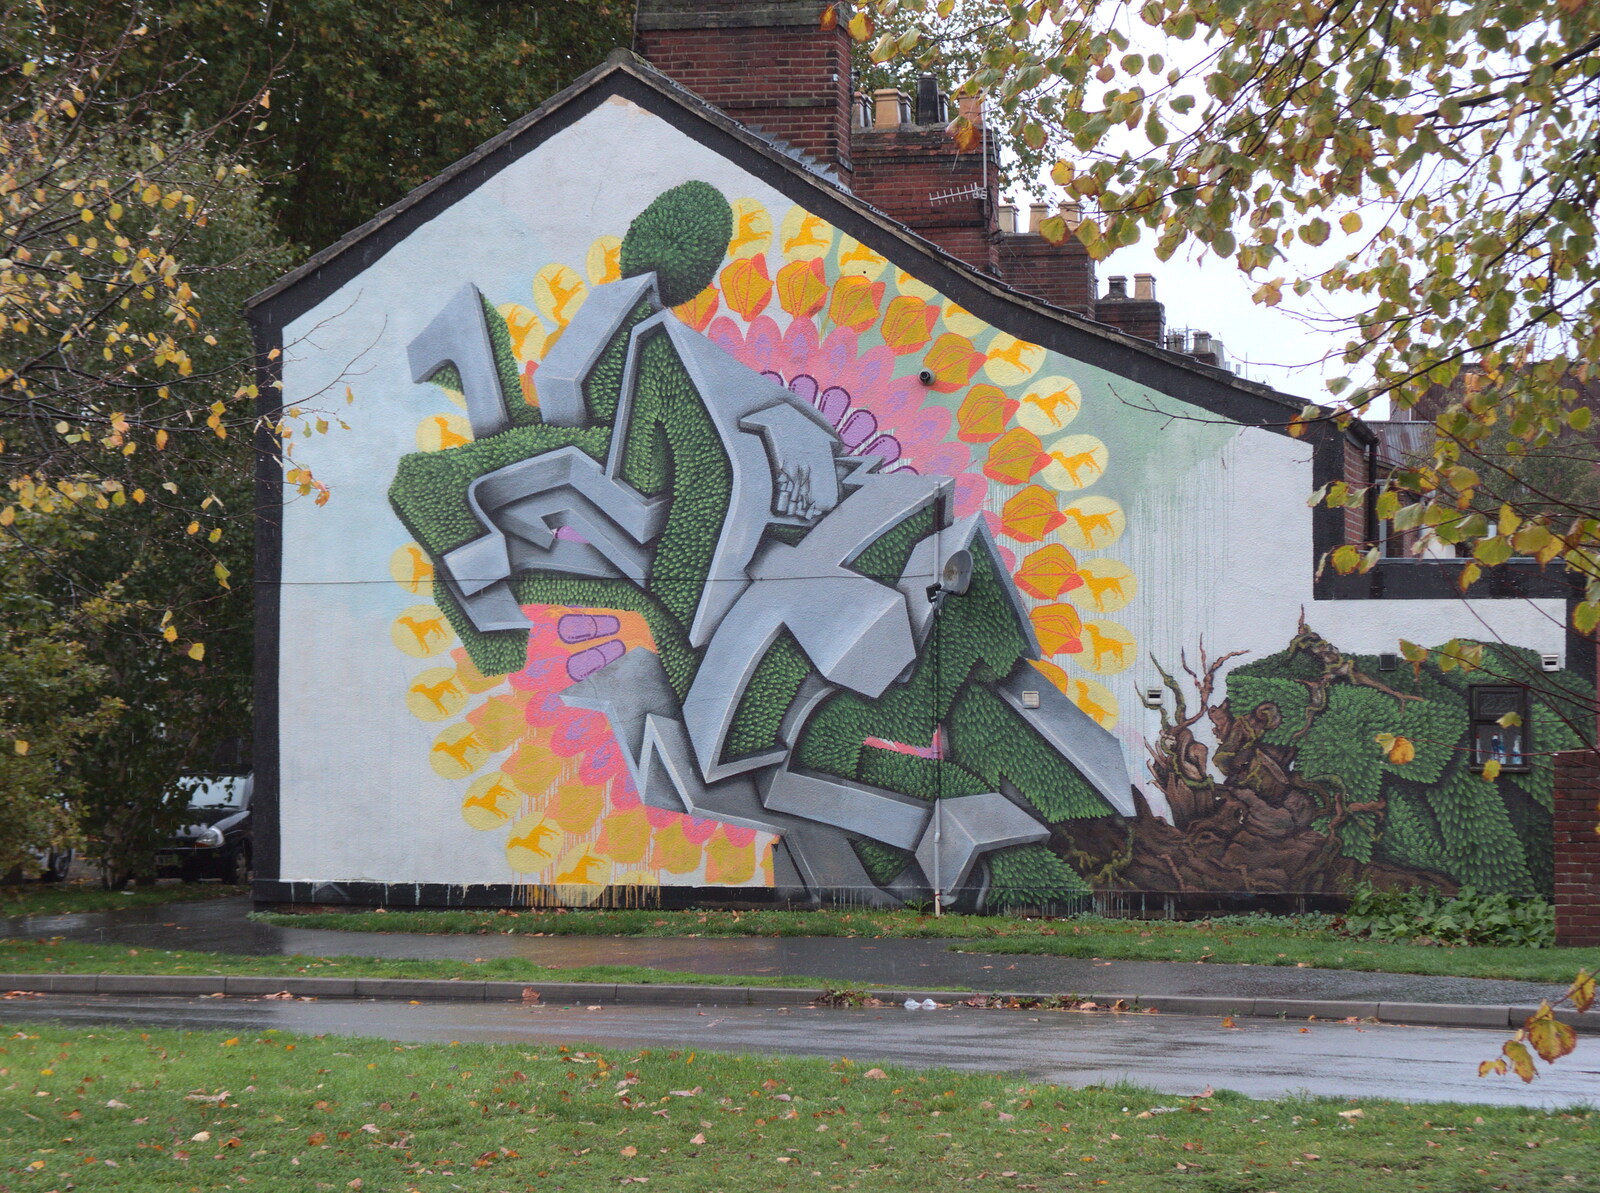 There's some street art in Norwich from Apples and Fireworks, Carleton Rode and Palgrave, Suffolk - 4th November 2018